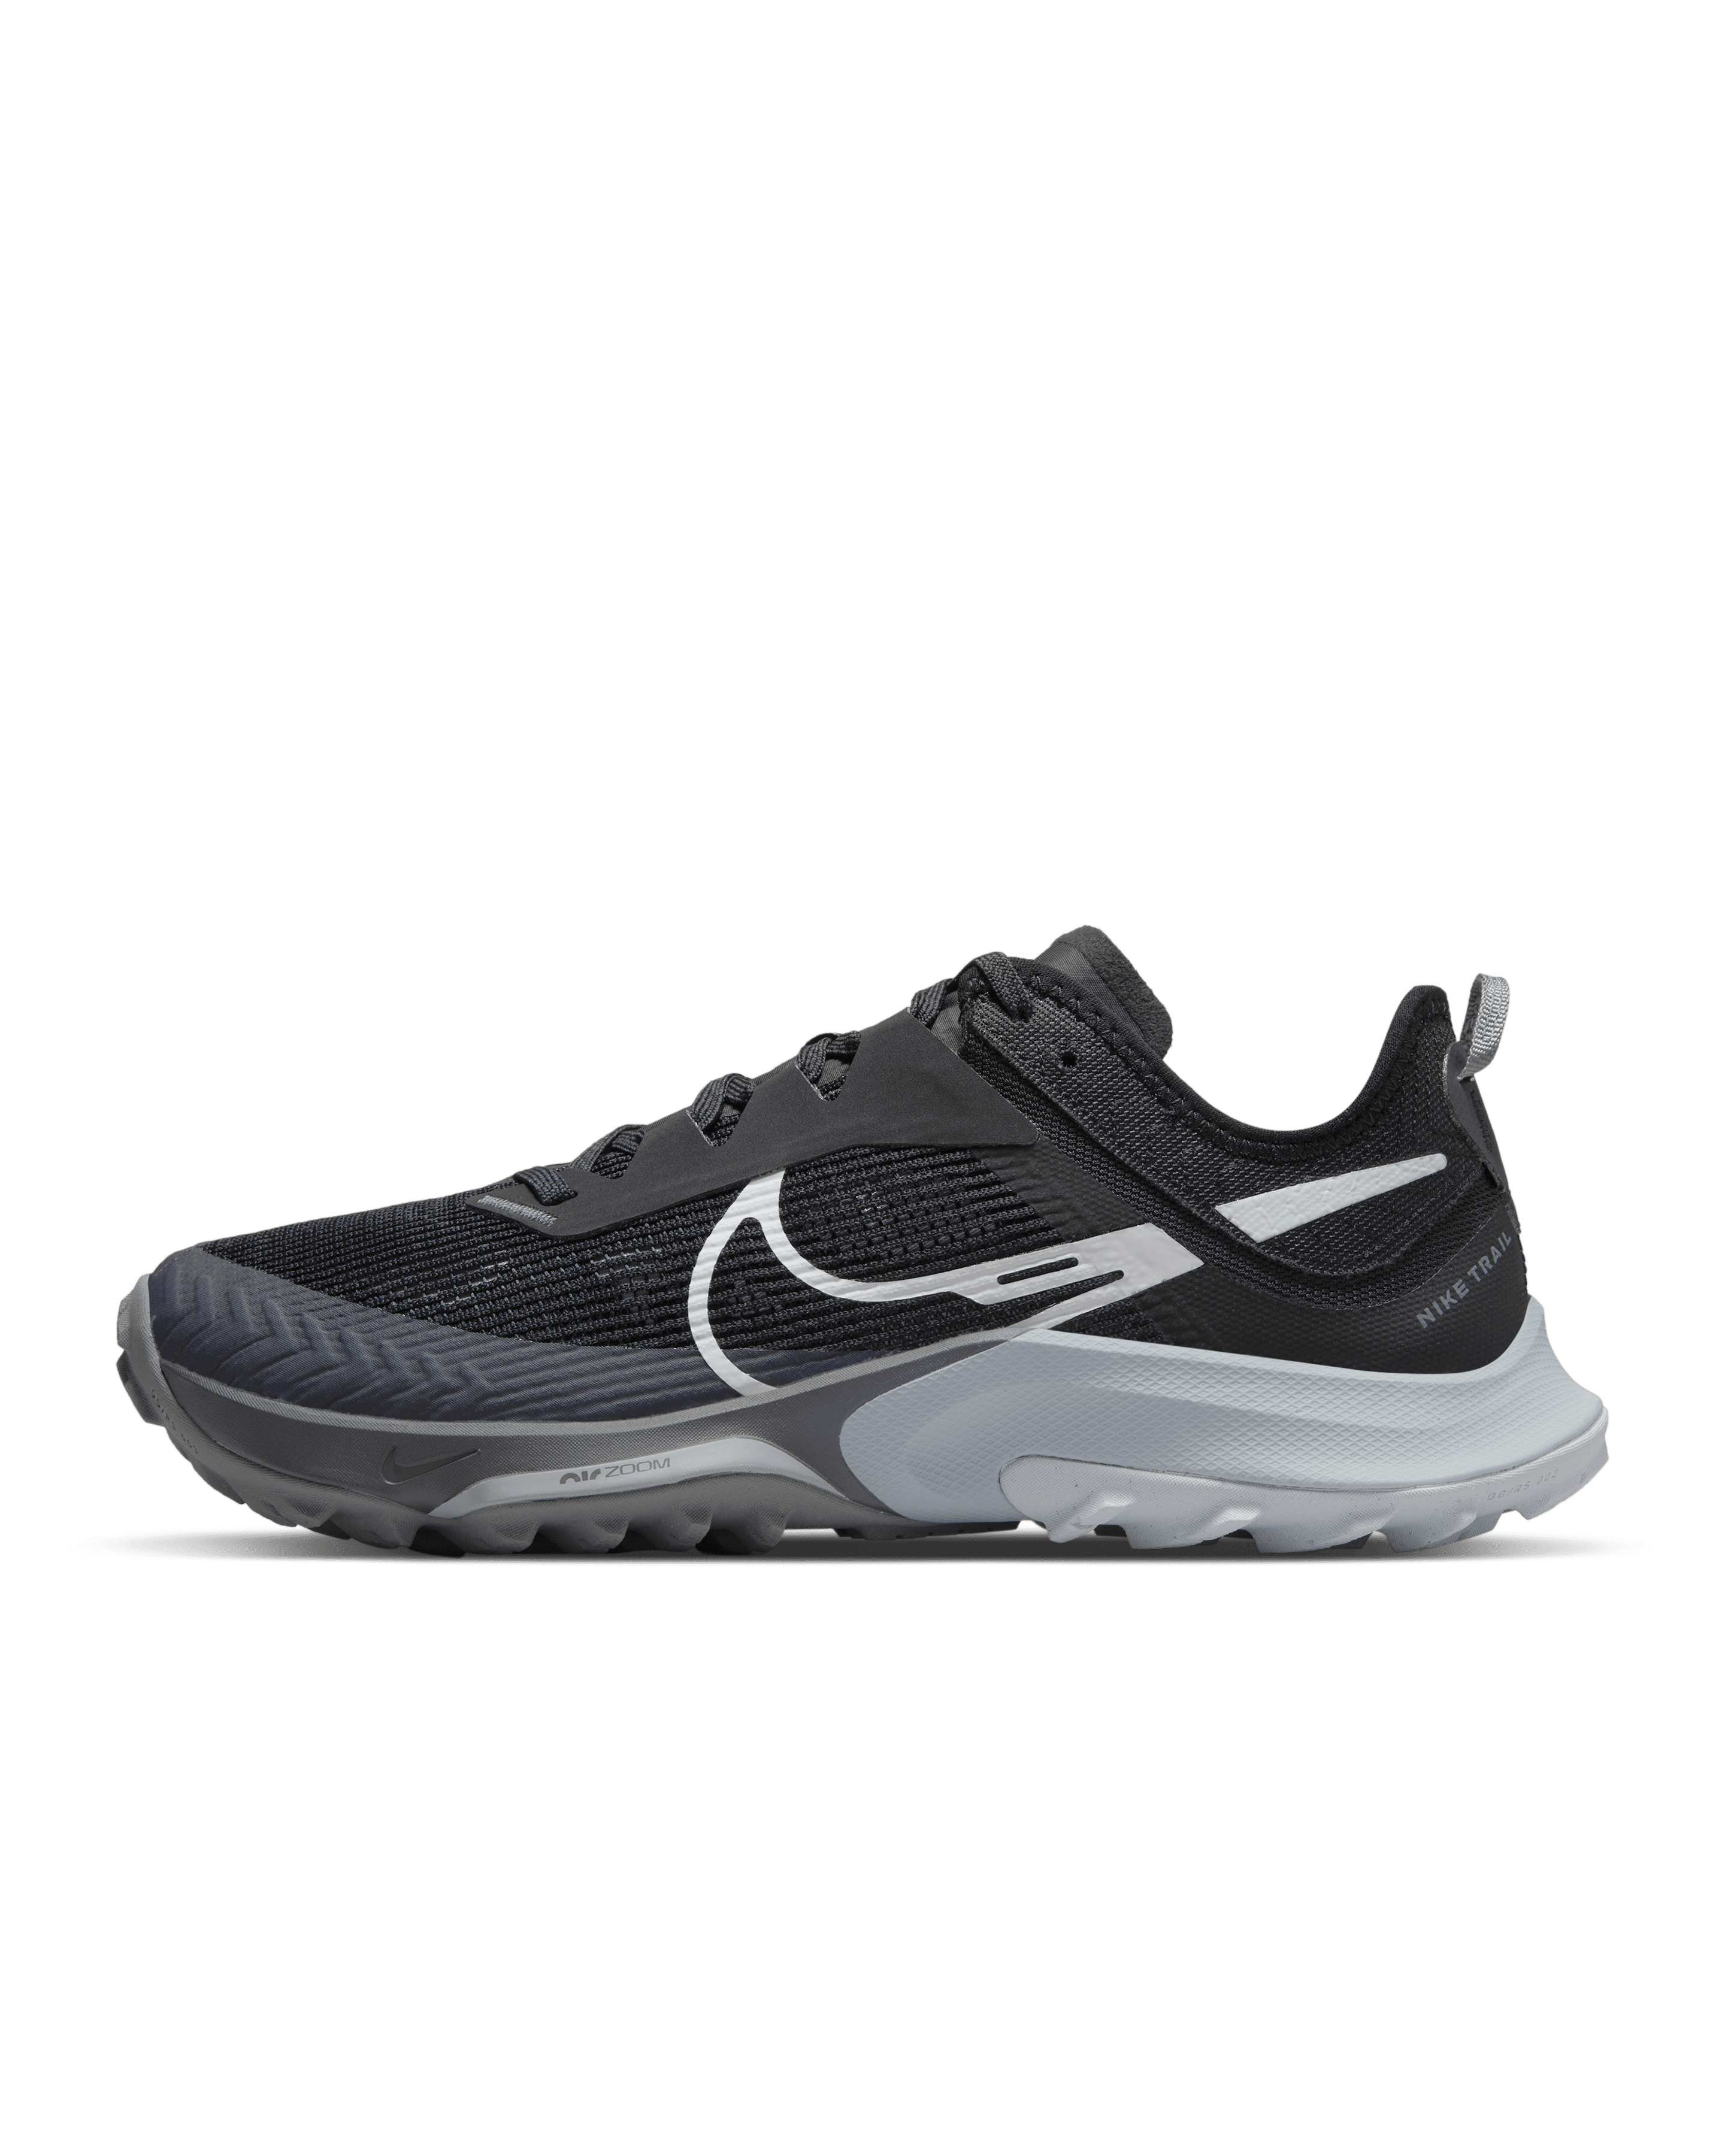 Nike Air Zoom Terra Kiger 8 Women's Trail Running Shoes